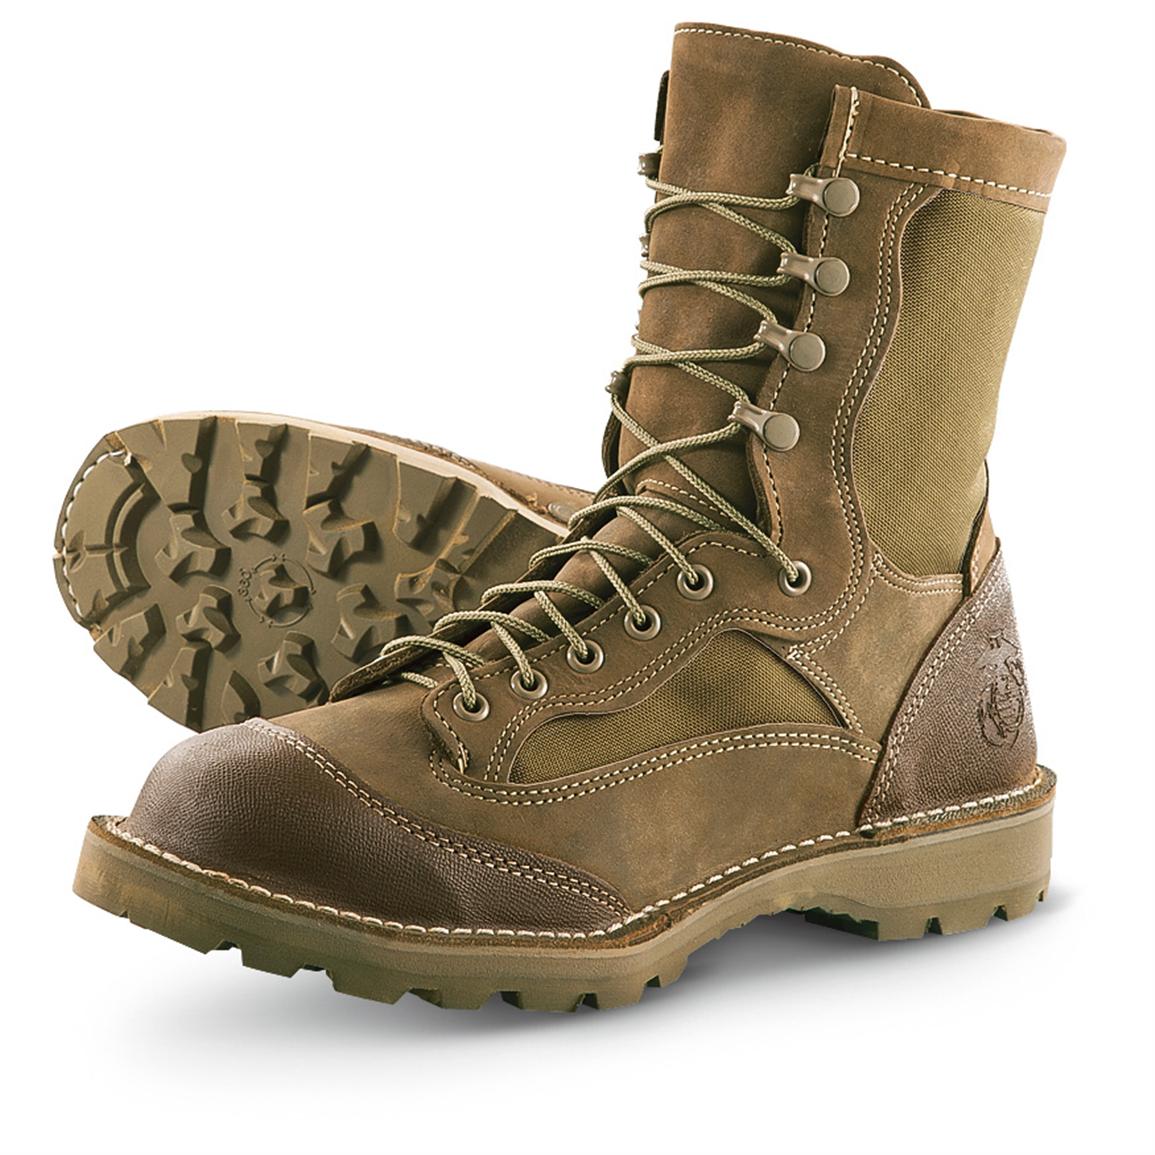 9.5 W Outdoor Hiking Boot Factory New Wellco USMC TW RAT BOOT SIZE 